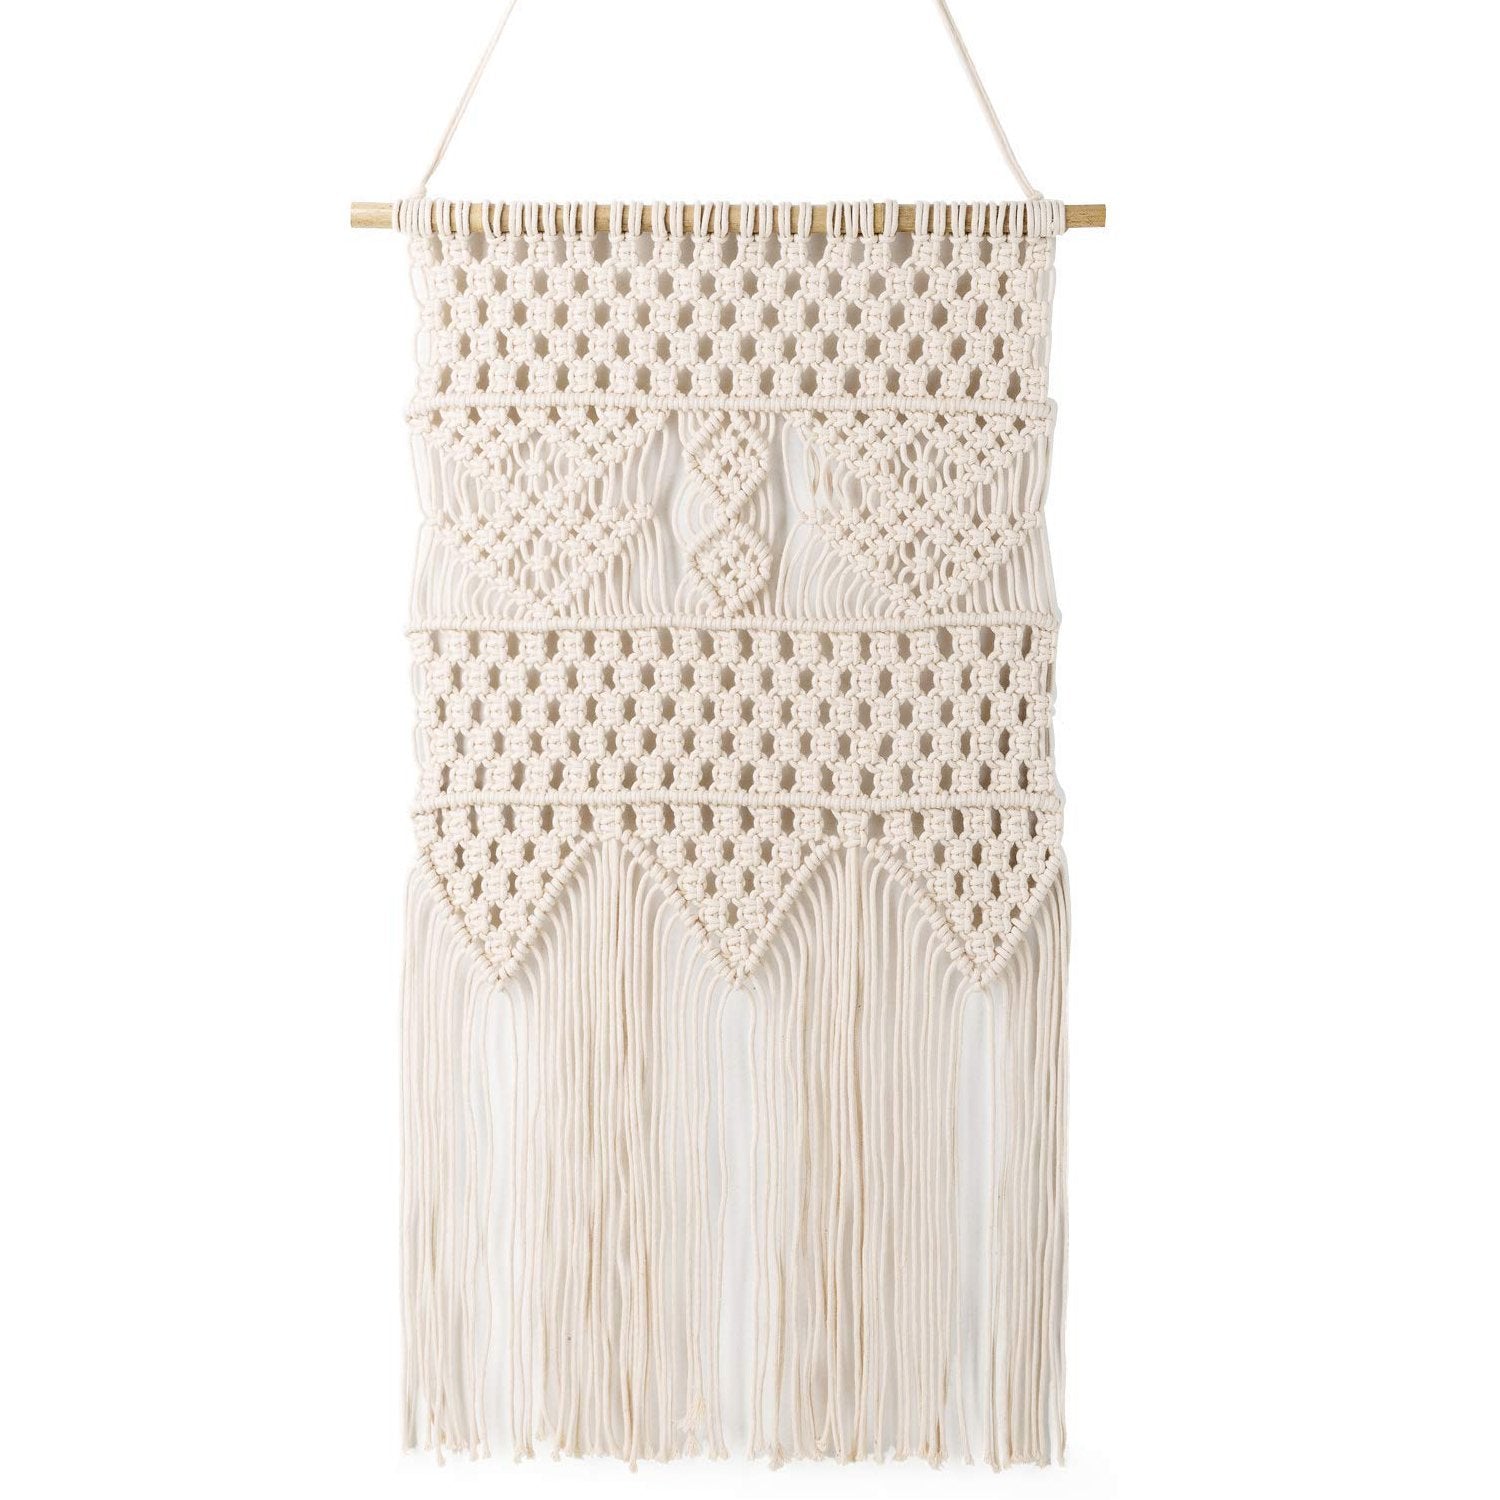 Macrame Wall Hanging EthnicTapestry - Nordic Side - 